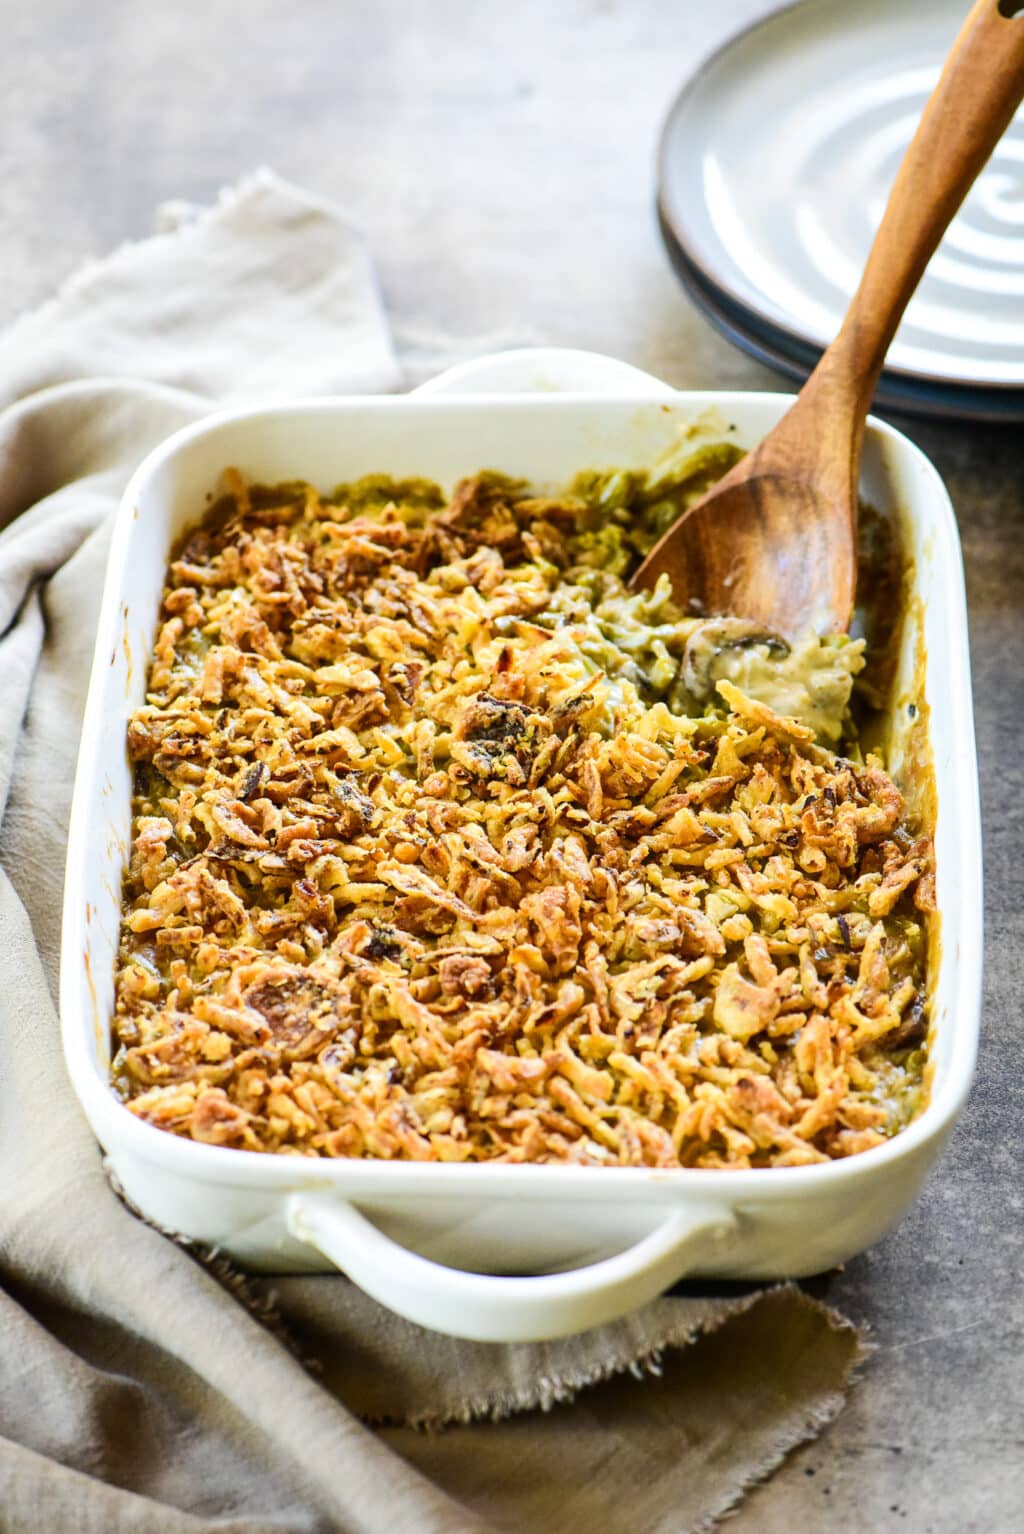 green bean casserole with wooden serving spoon